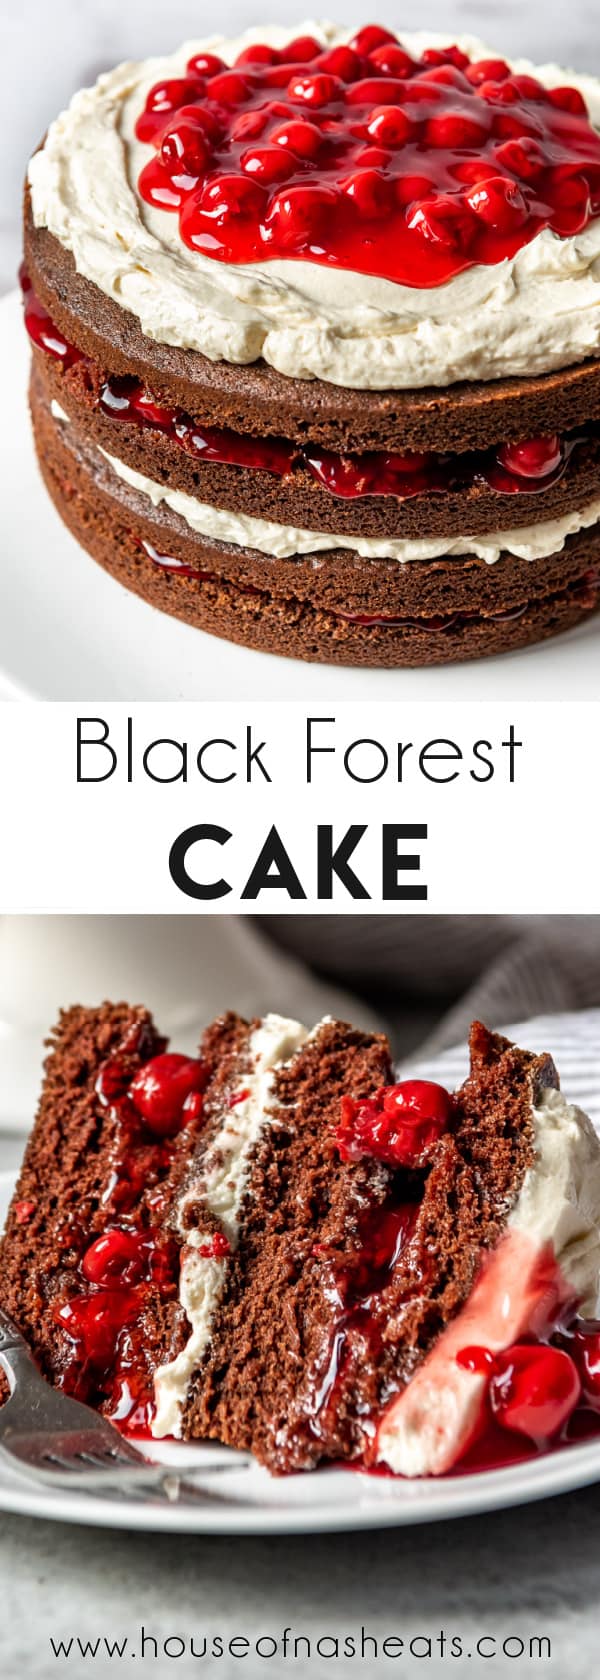 A picture of a whole black forest cake with a slice of cake beneath it and text overlay.